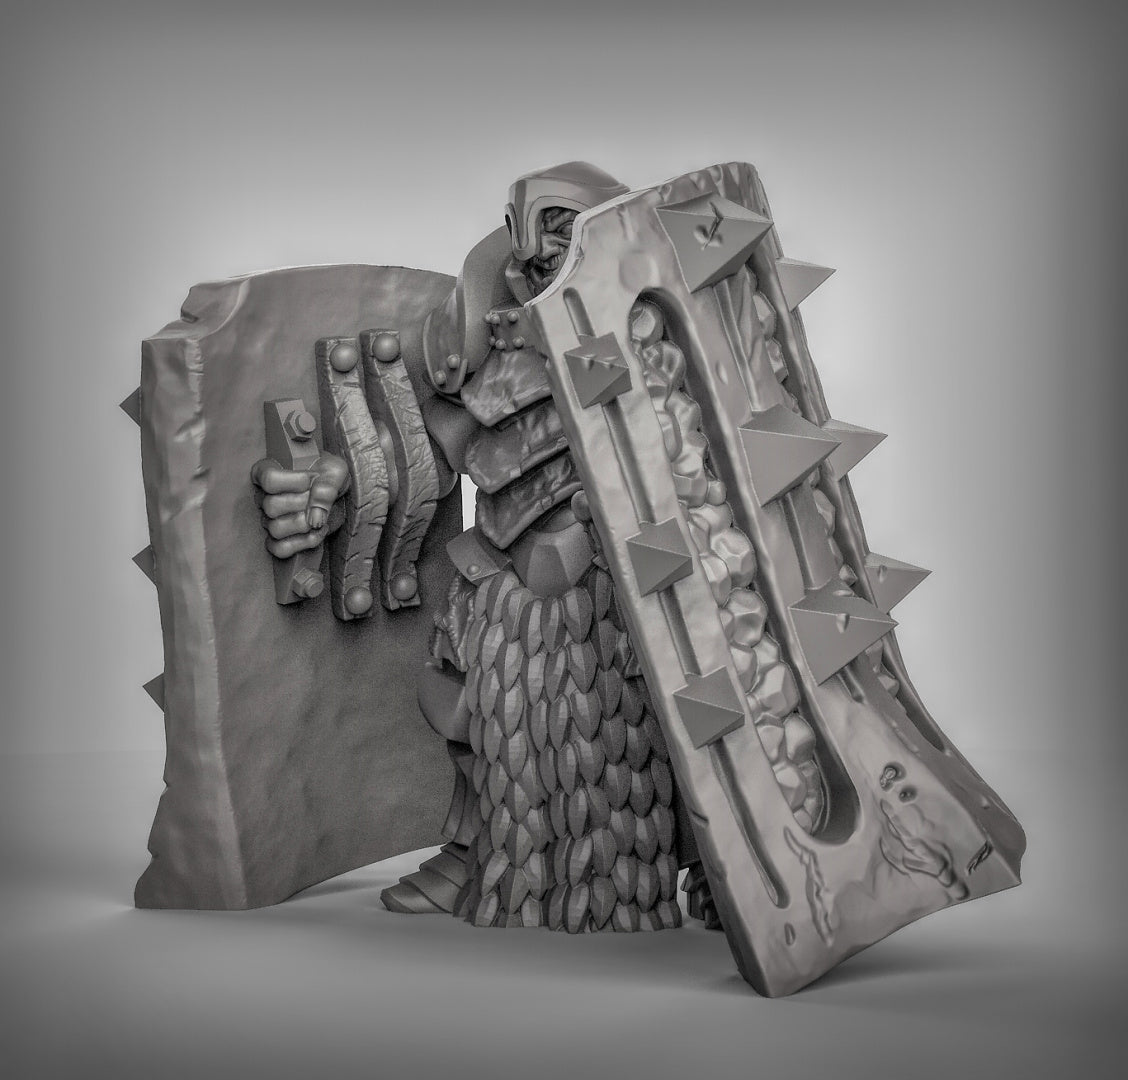 Fire Giant Dreadnoughts x 2 Resin Models for Dungeons 'n Dragons & Board RPGs